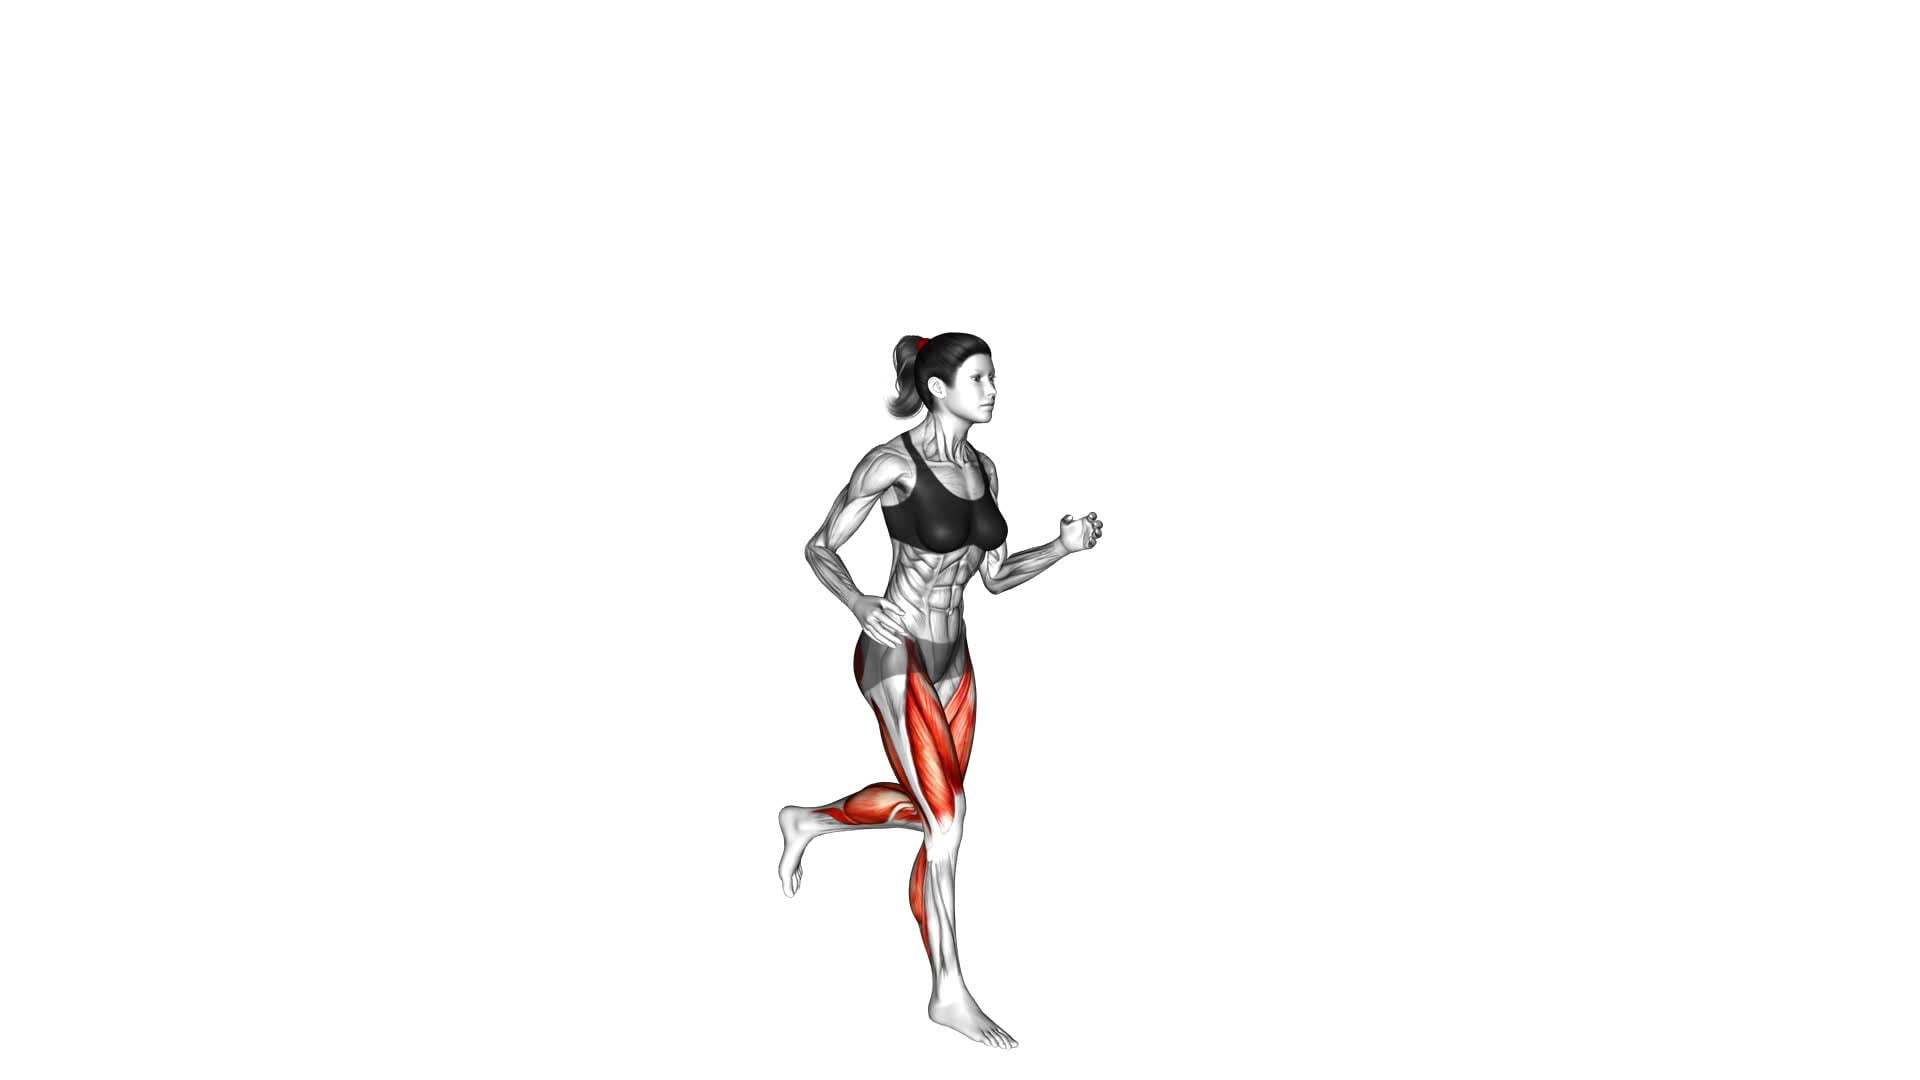 Run and Half Knee Bend (female) - Video Exercise Guide & Tips